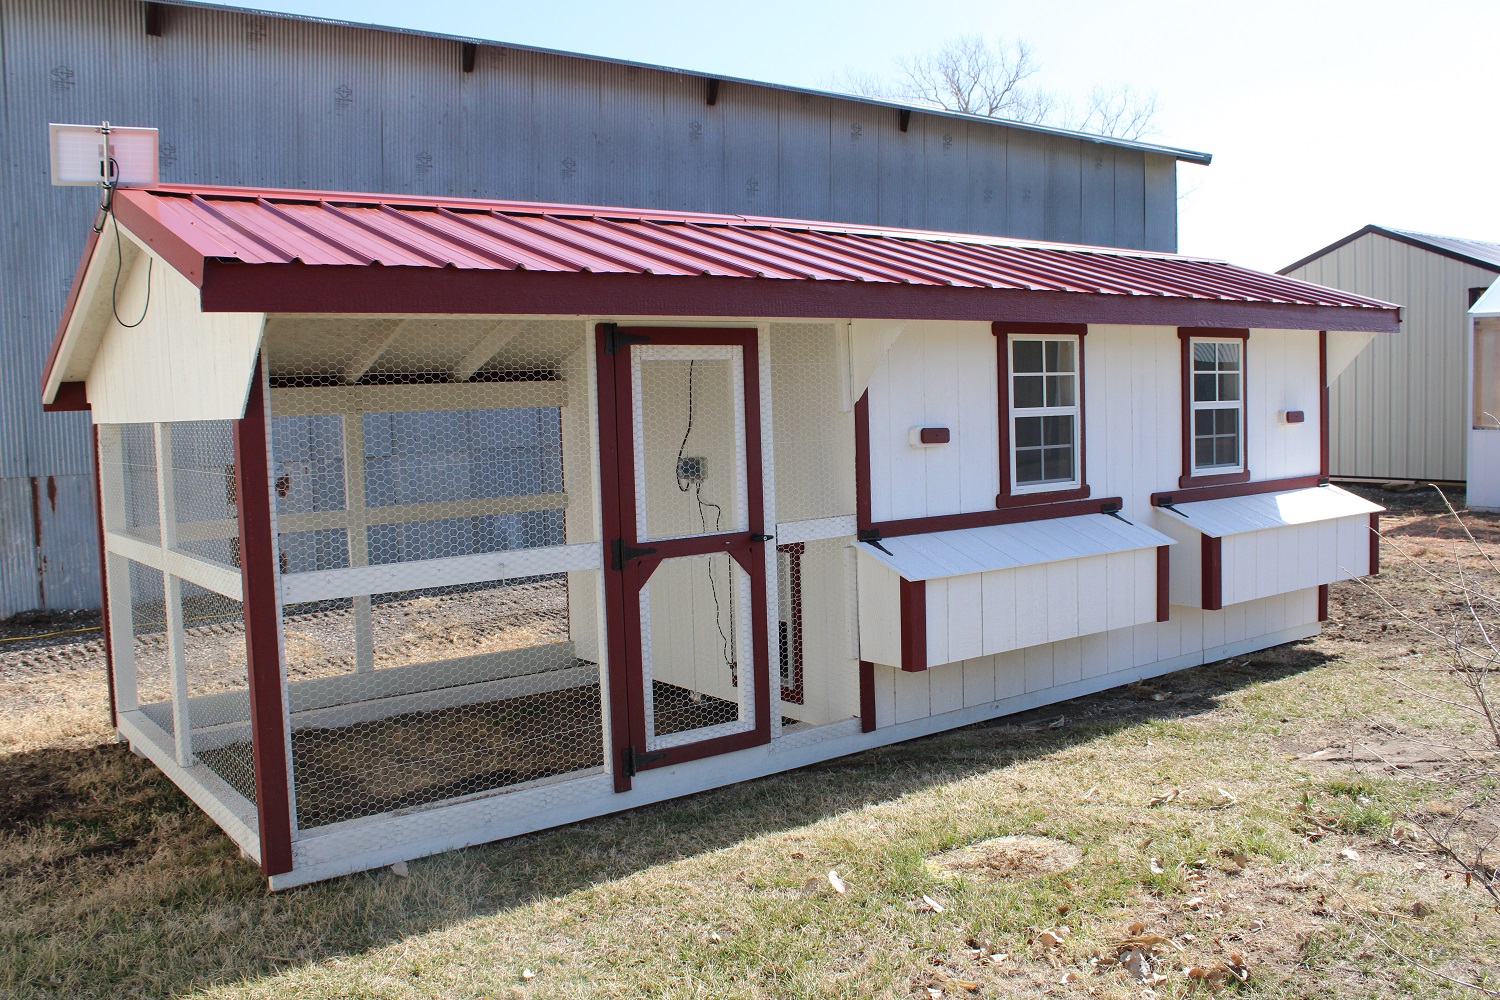 Goat Shed For Sale Near Me - Projective Portable Buildings